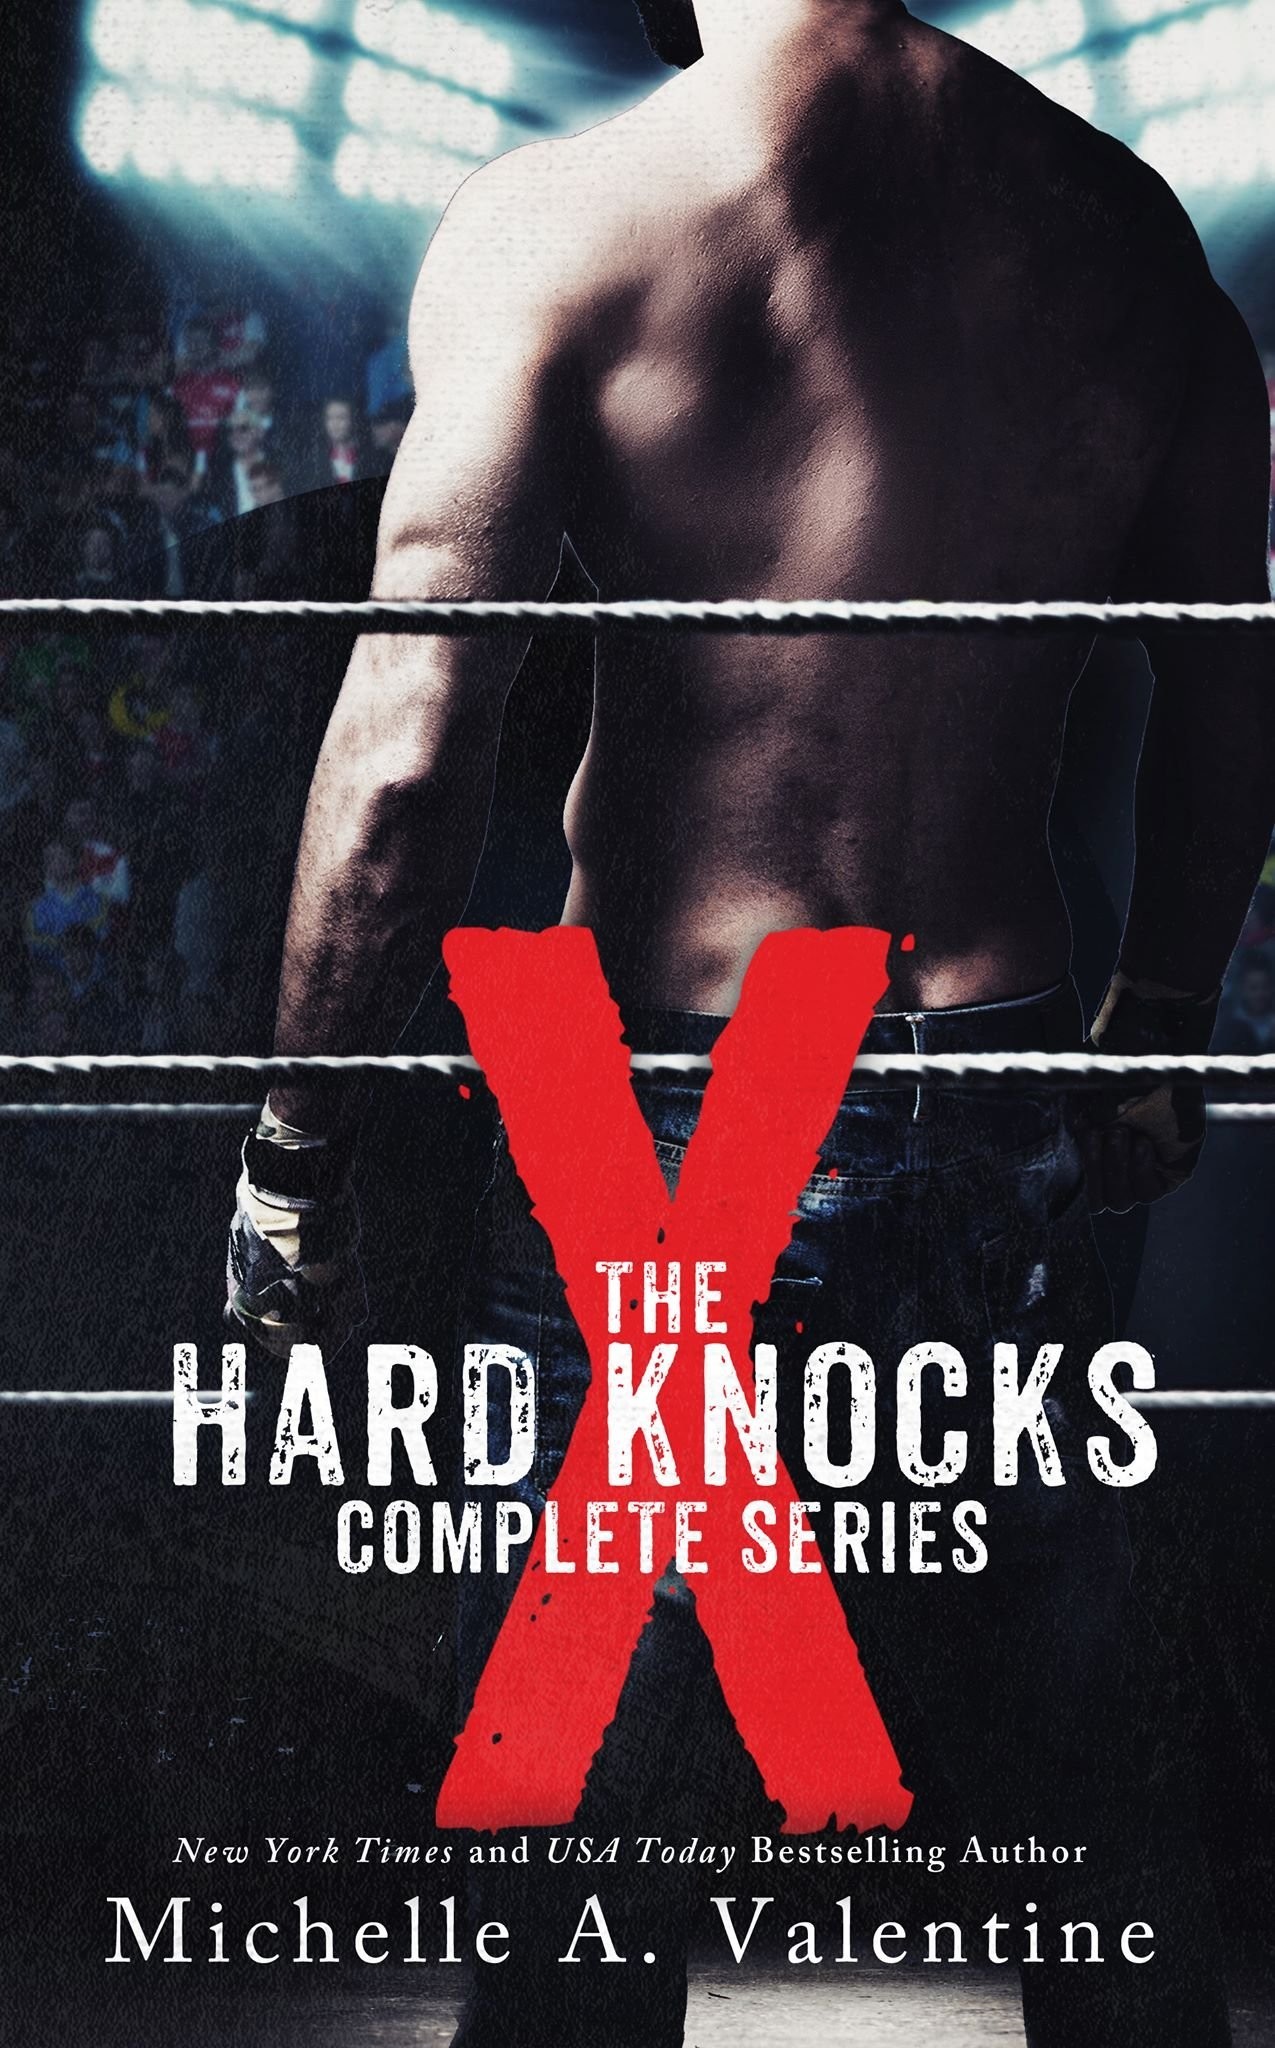 X: The Hard Knocks Complete Story by Michelle A. Valentine